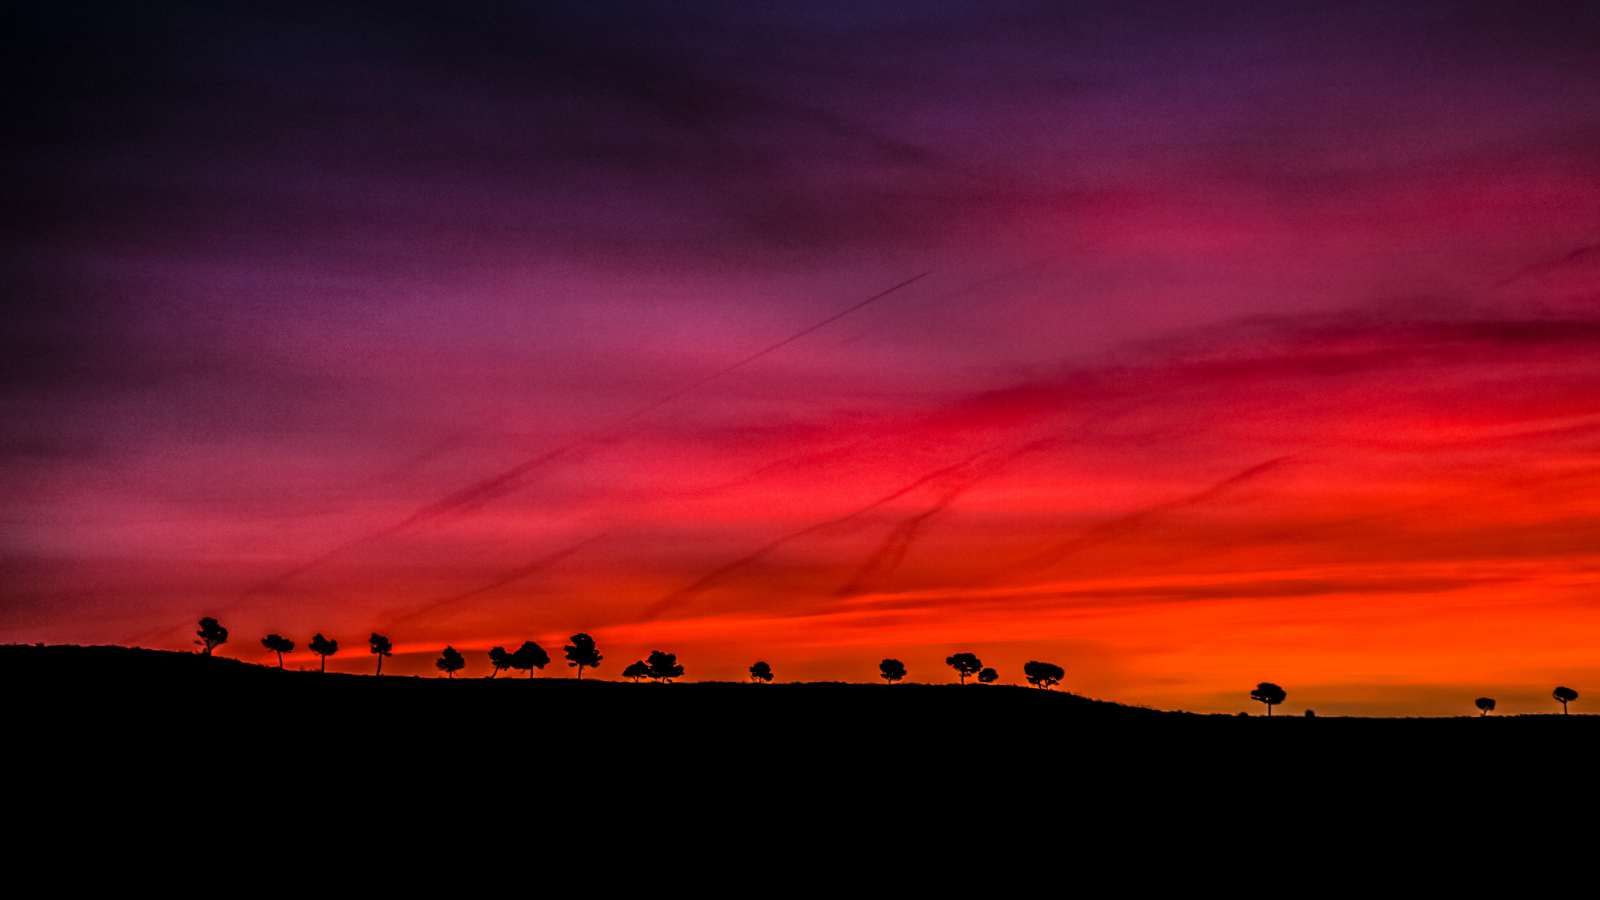 Download wallpaper 1600x900 silhouette, red sky, trees, sunset, 16:9  widescreen 1600x900 hd background, 18058